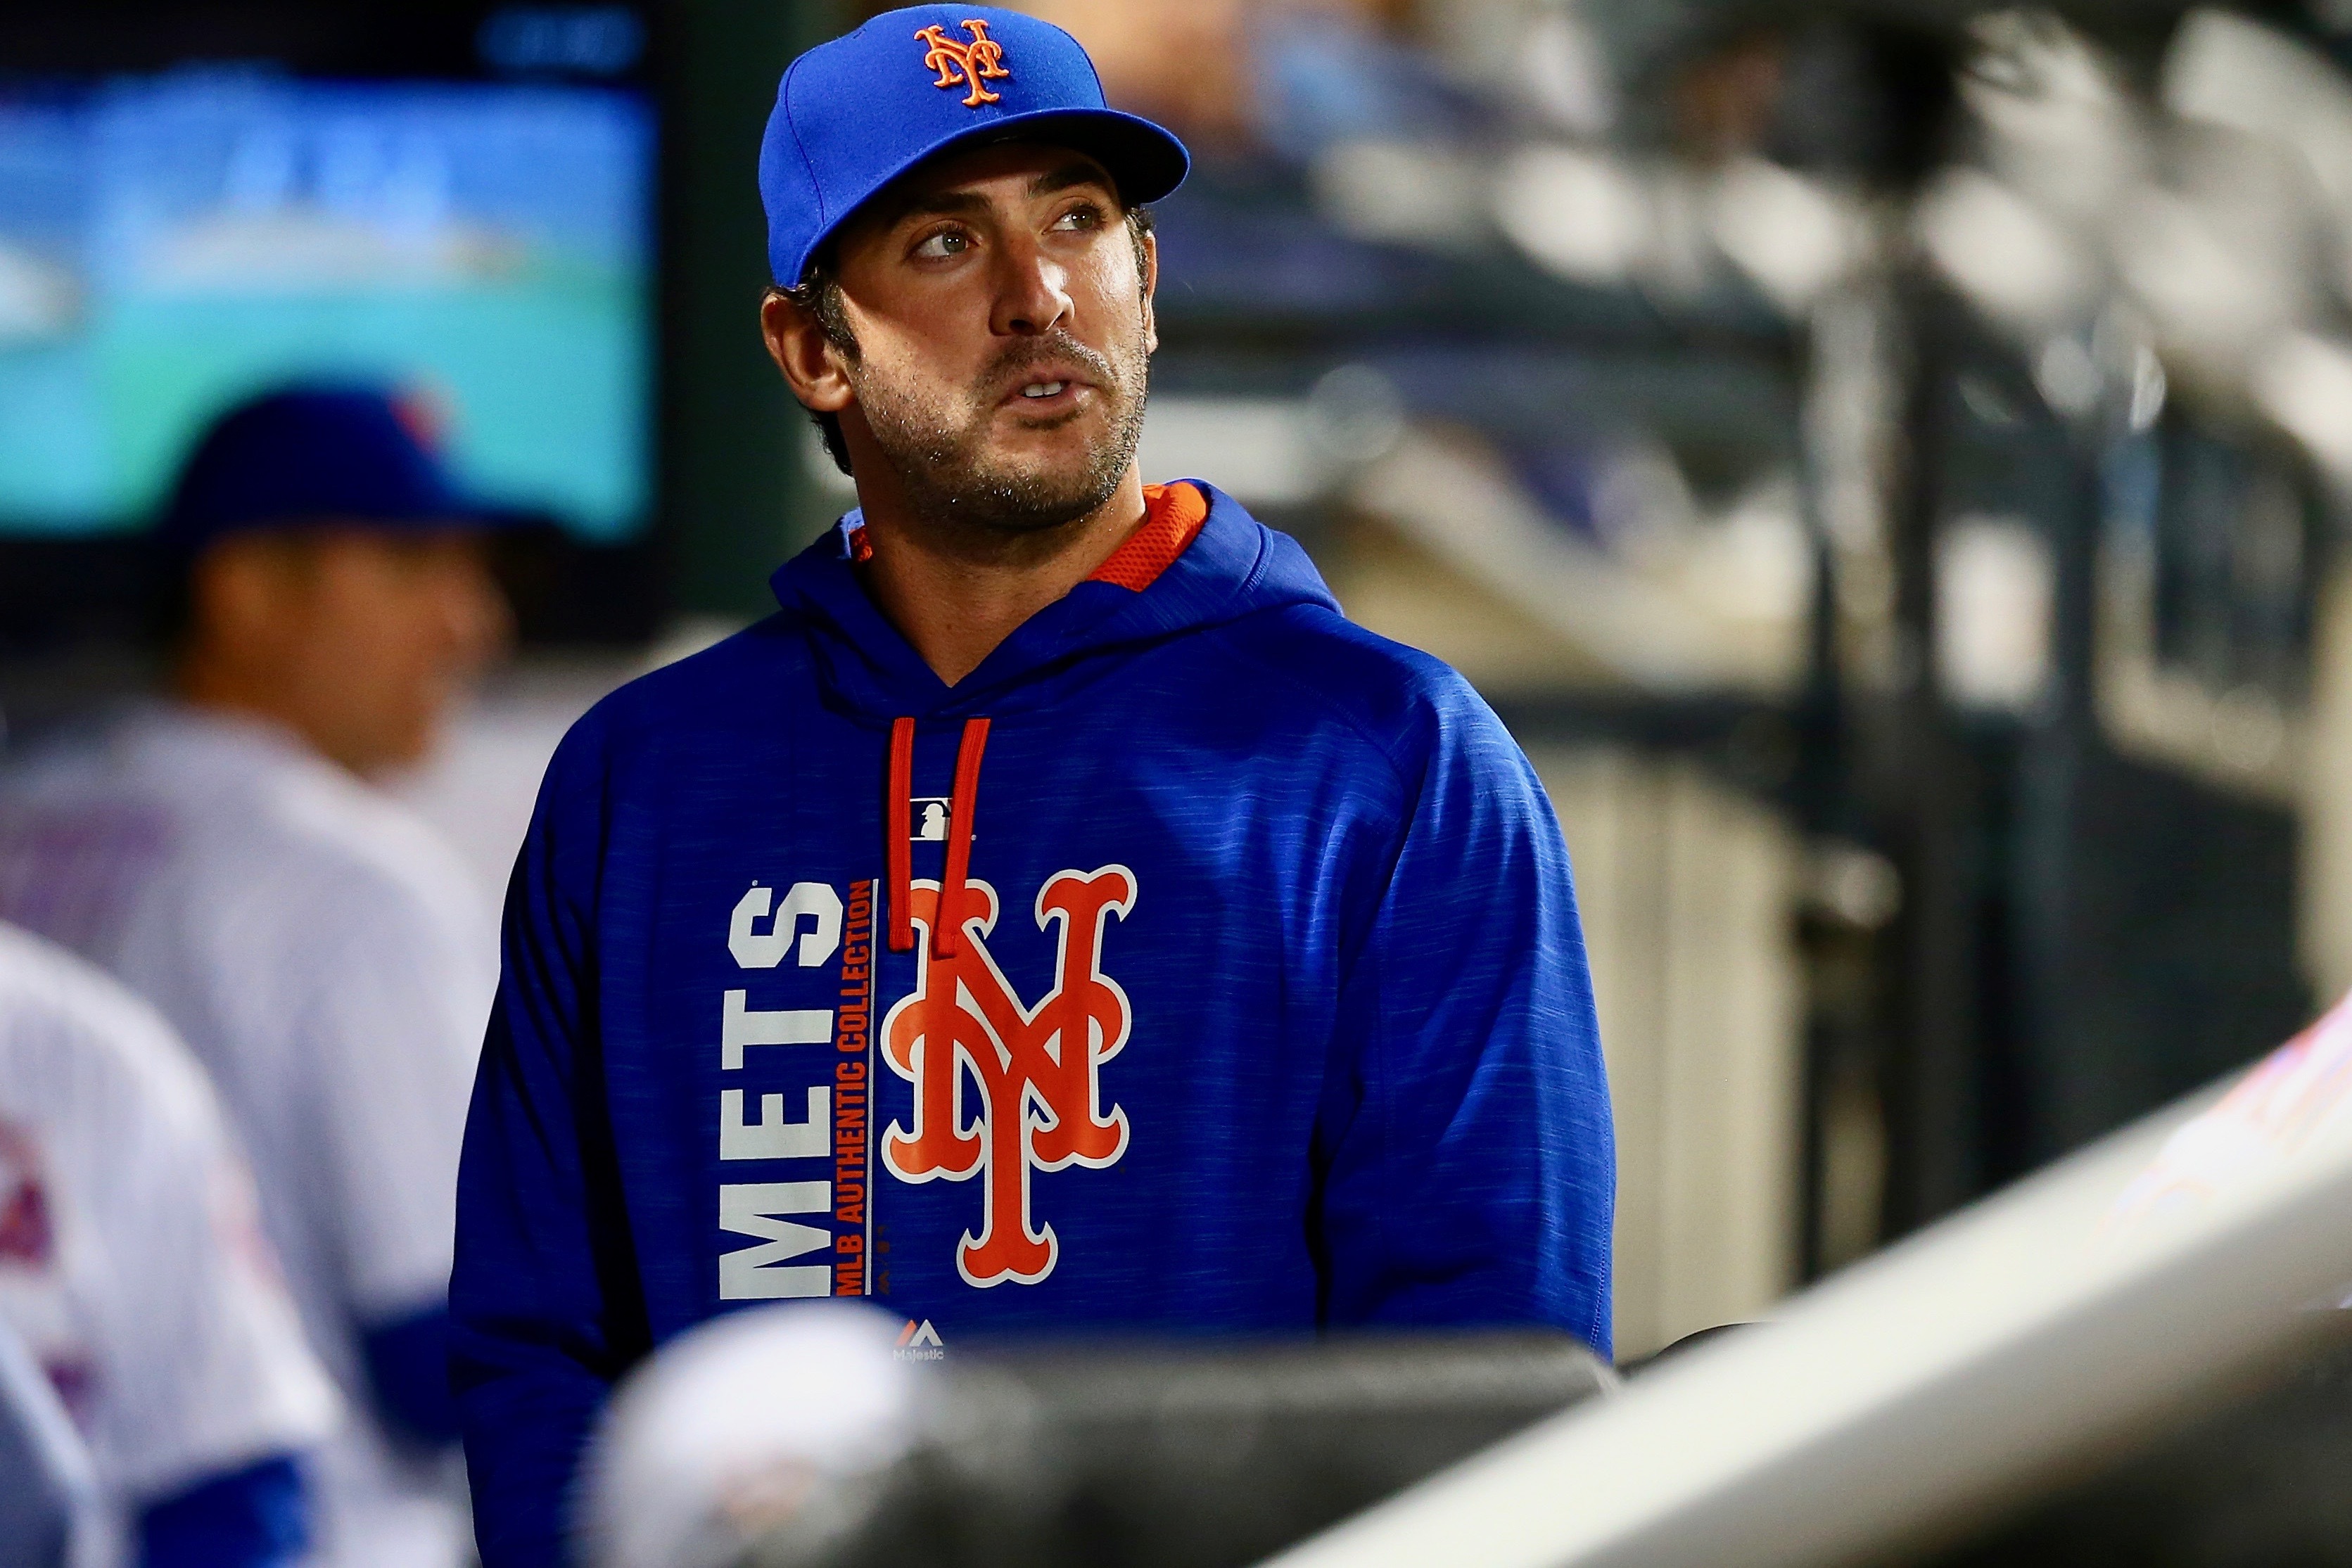 Mets rise and fall of Matt Harvey: An oral history